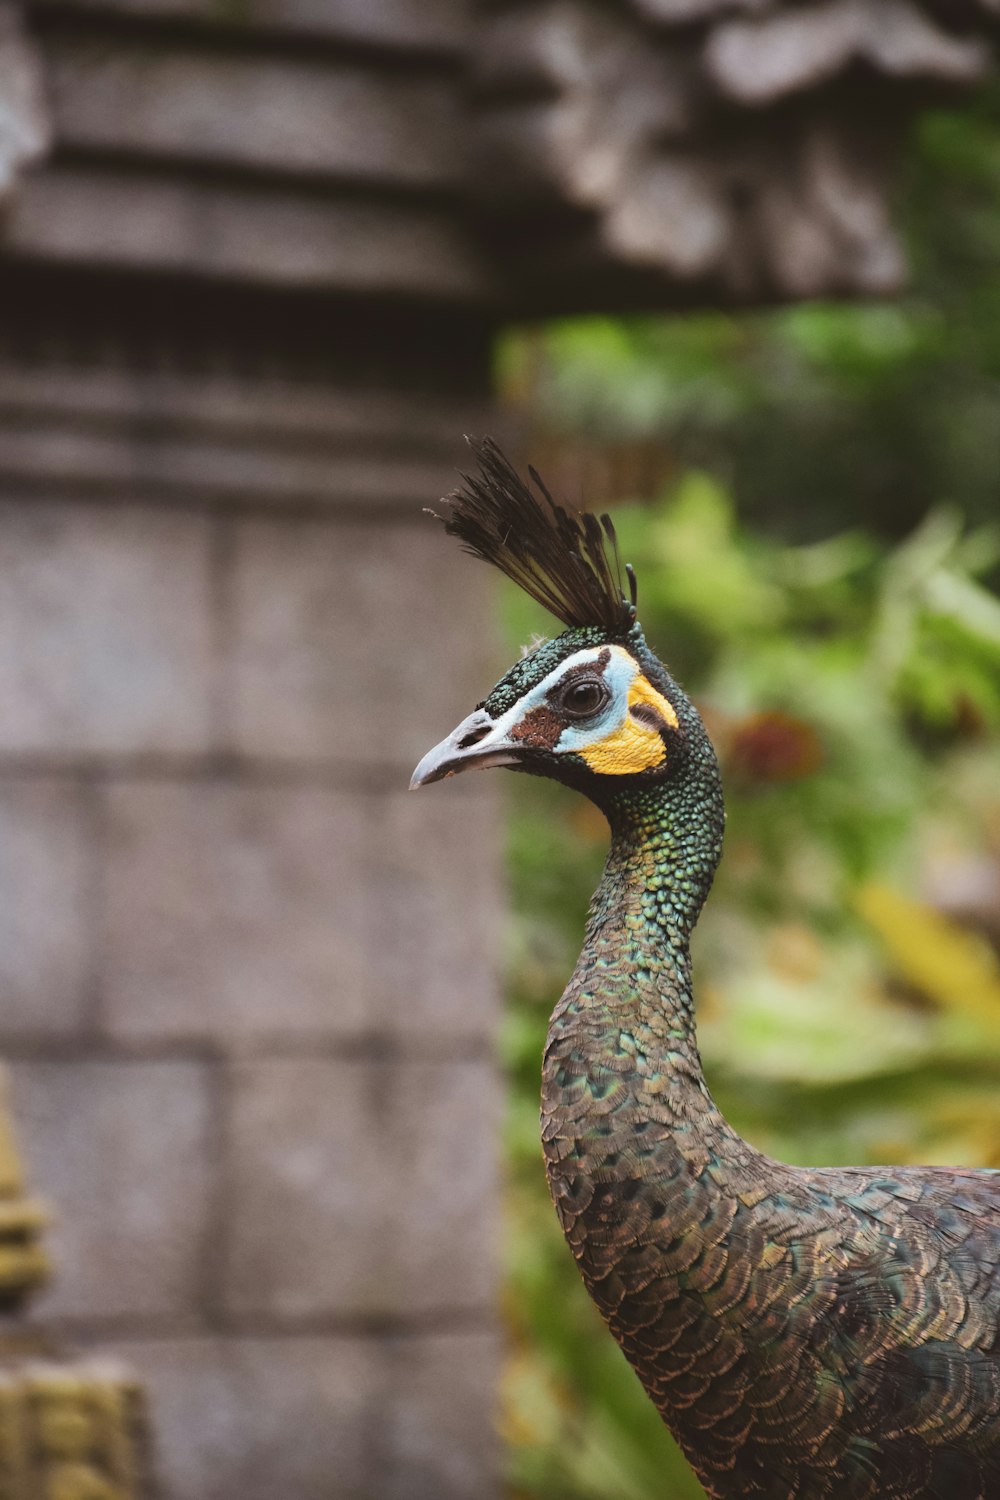 a close up of a peacock near a building